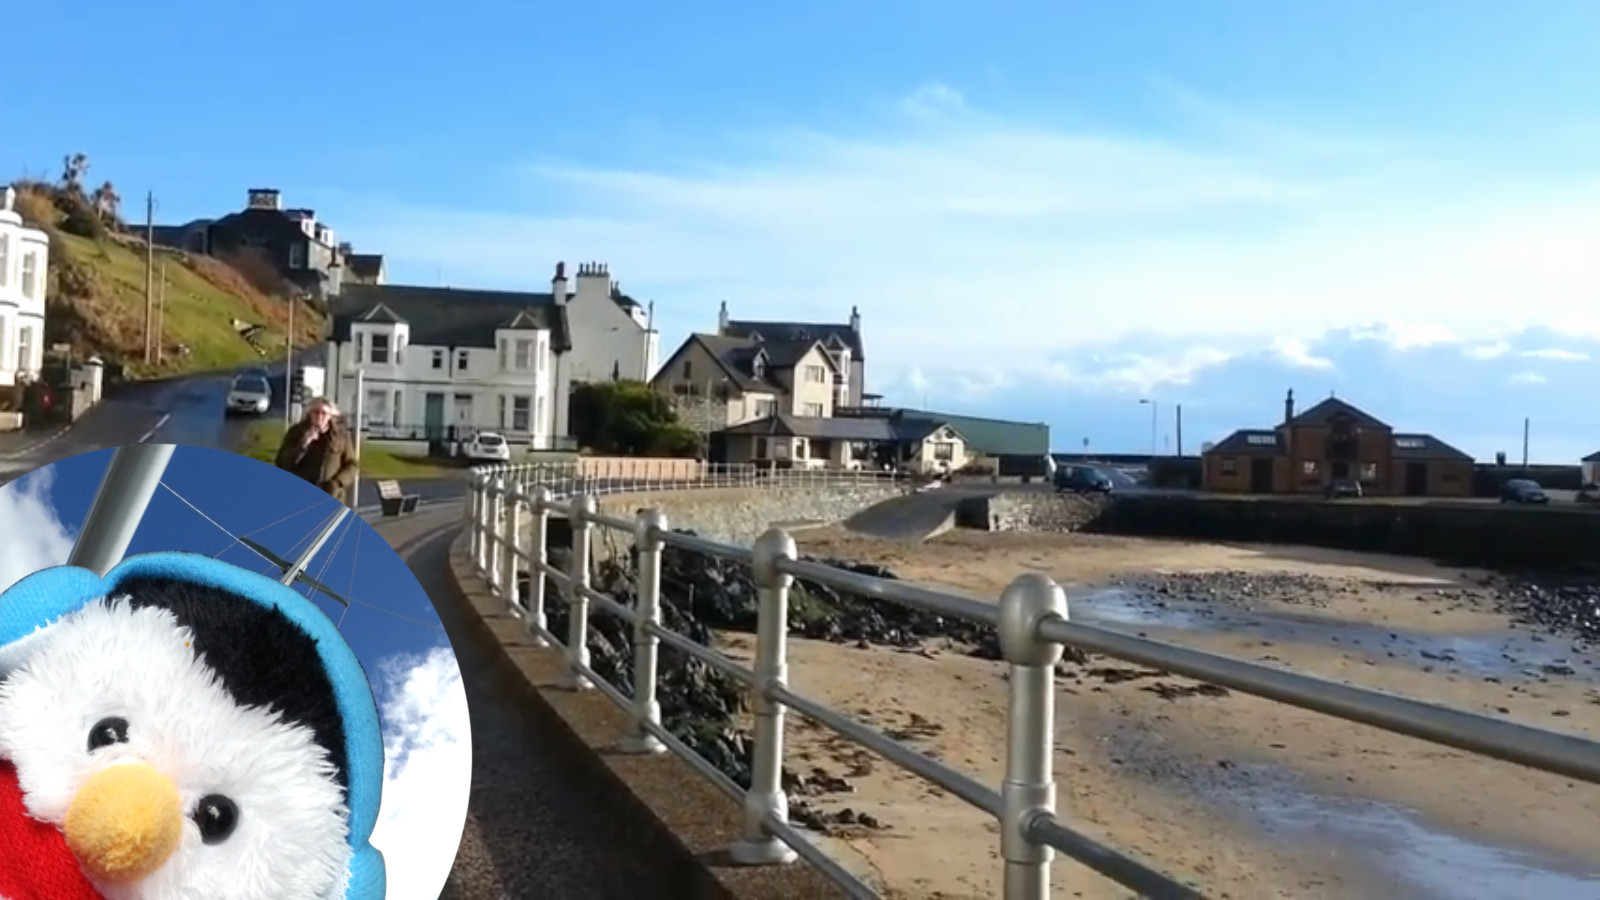 Watch Portpatrick to Peel in full screen mode and leave comments etc.